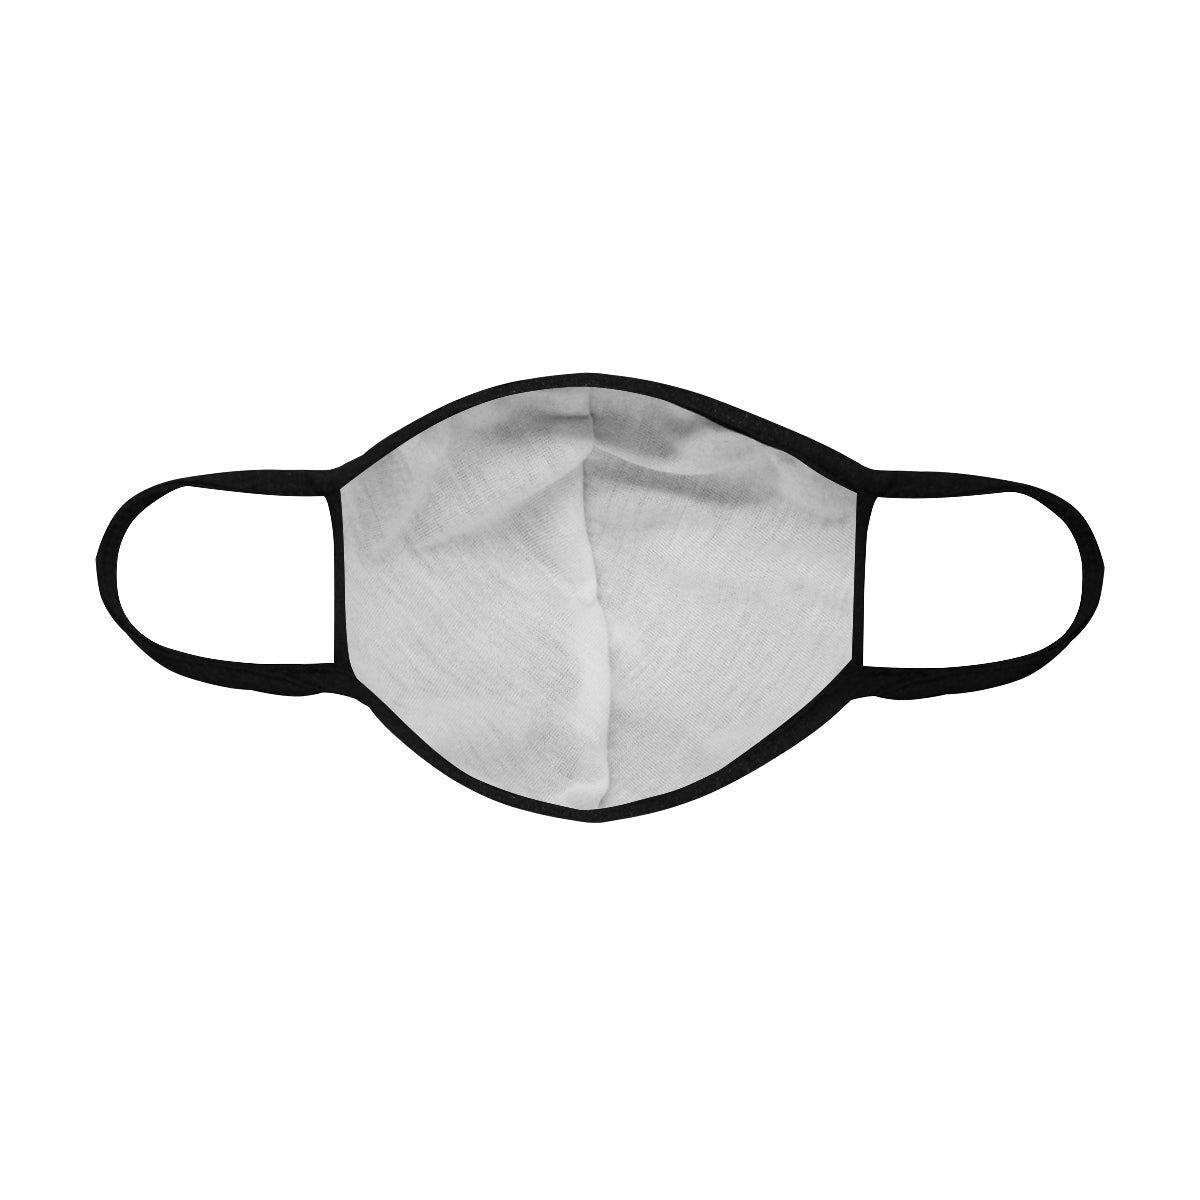 Alternate Print Cotton Fabric Face Mask with filter slot (30 Filters Included) - Non-medical use